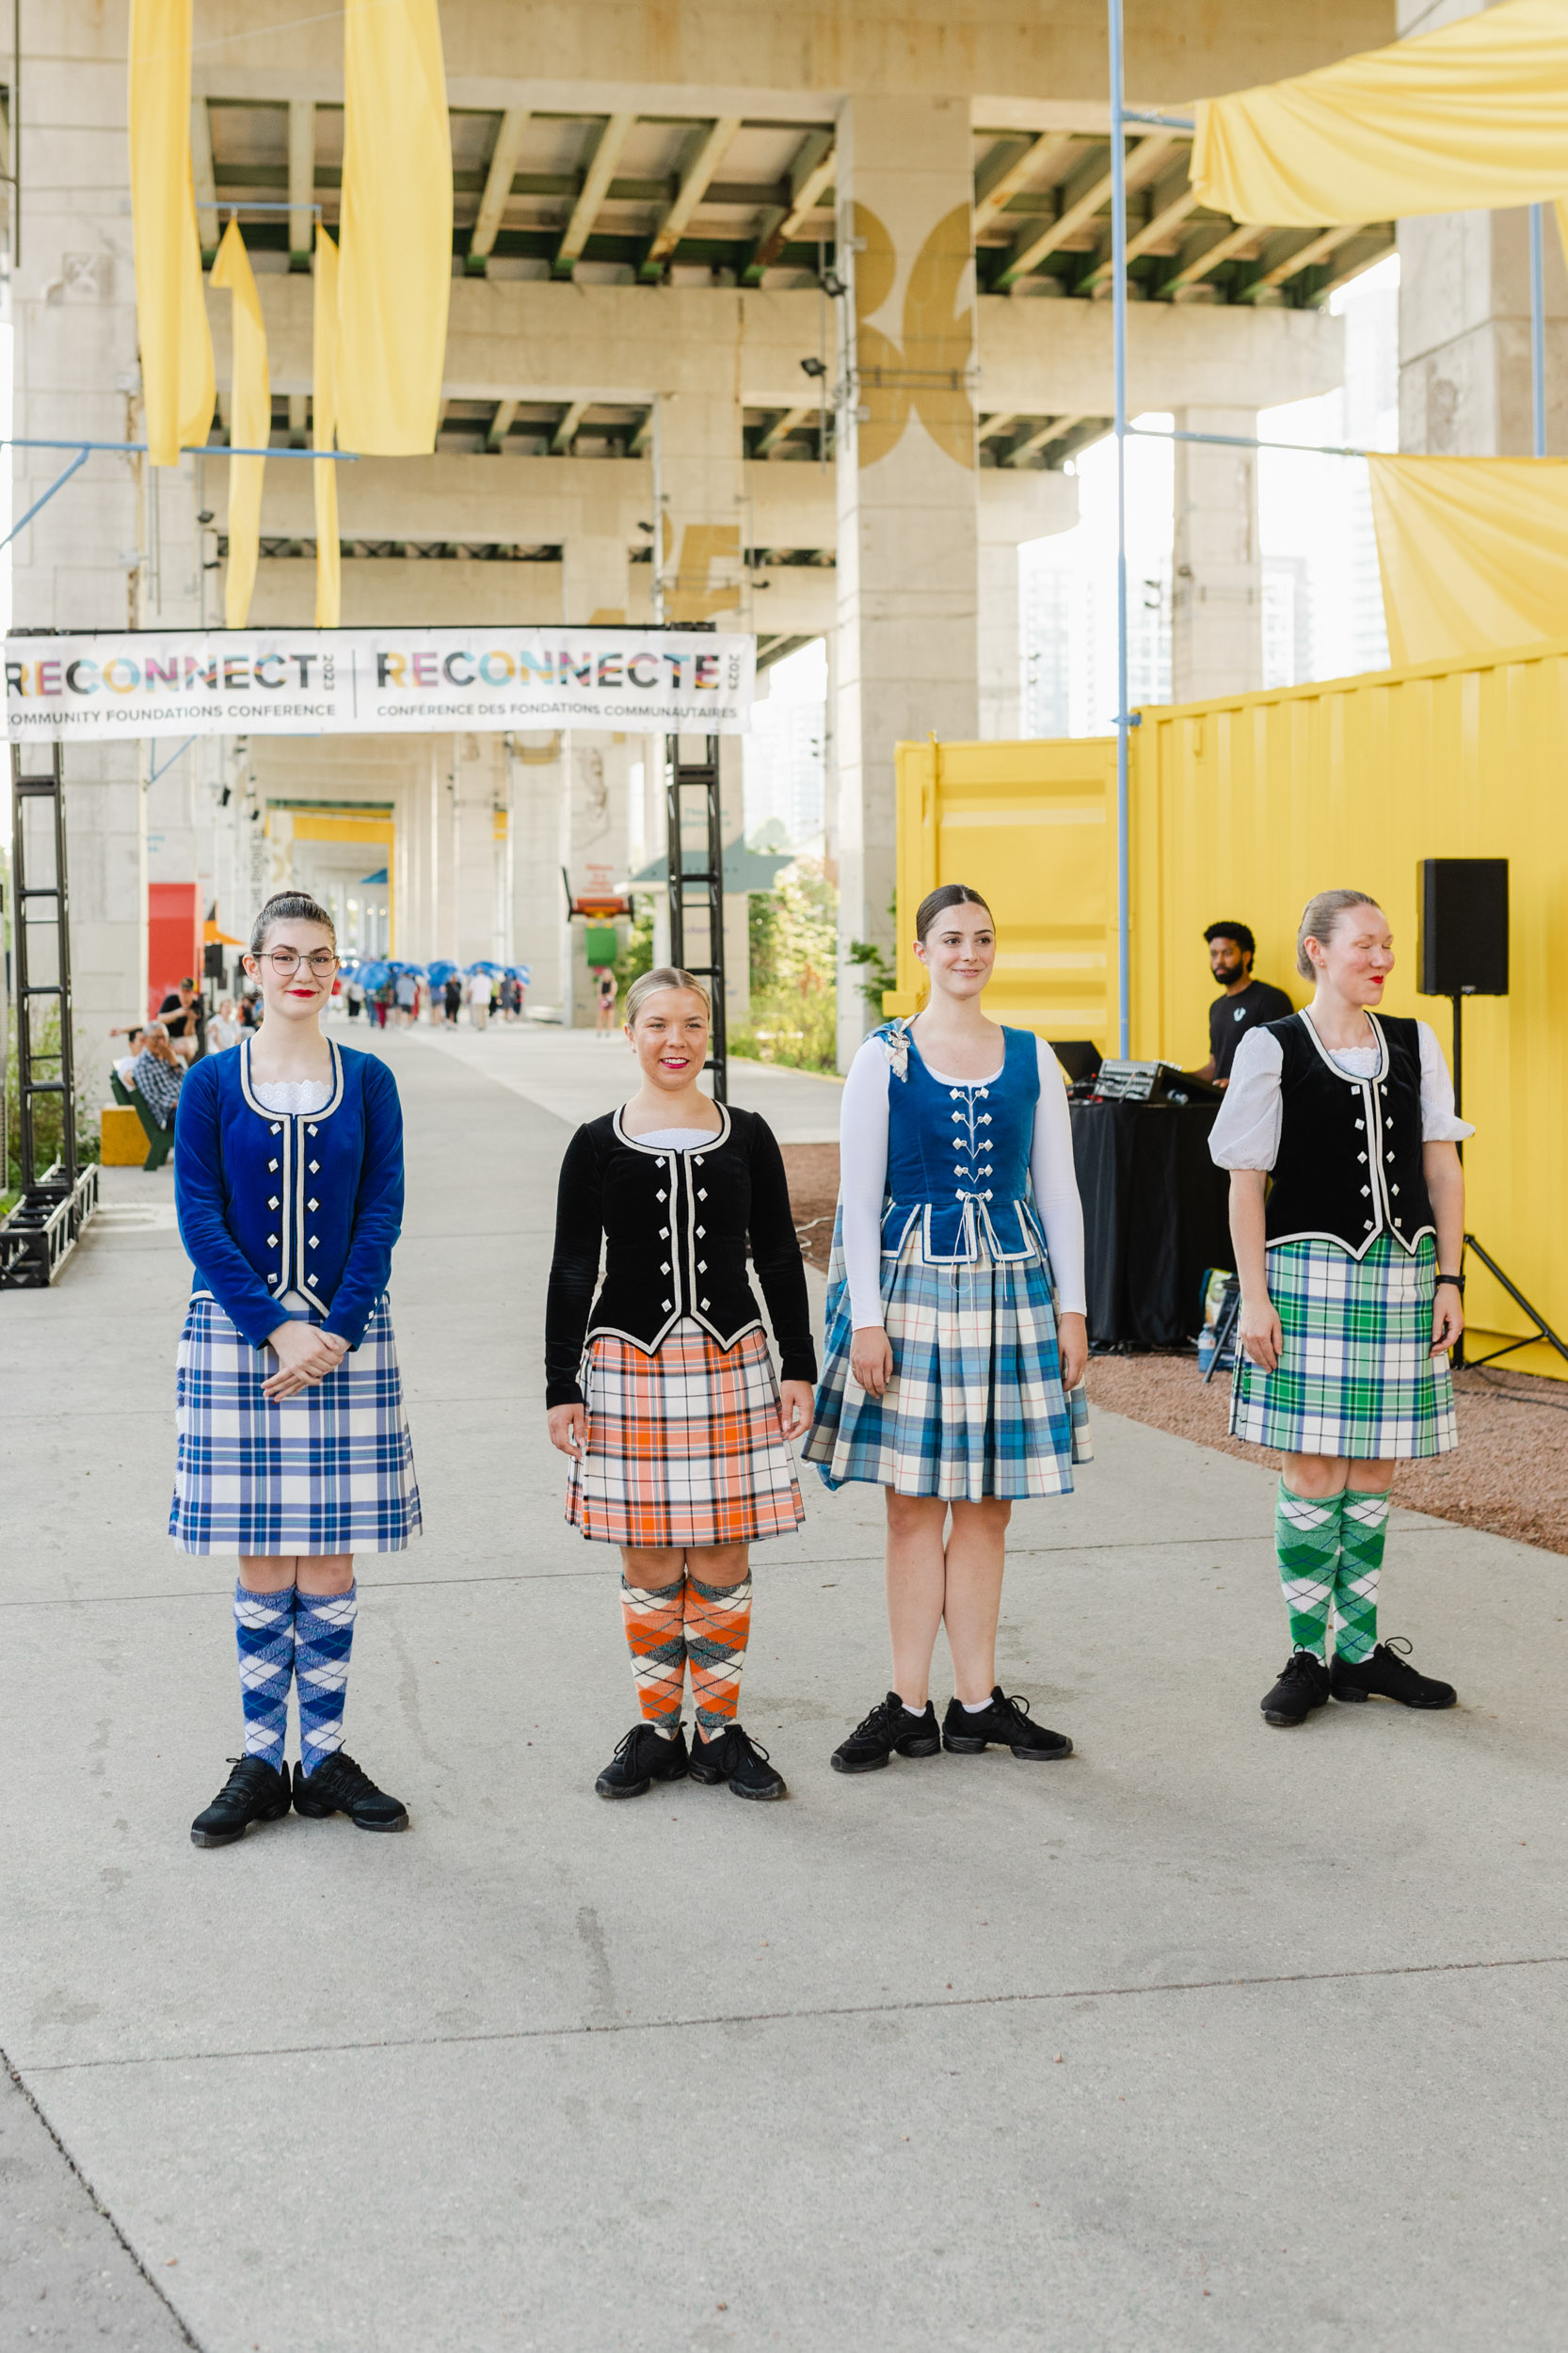 Conference photographers capture Scottish dancers in kilts standing in front of a building.